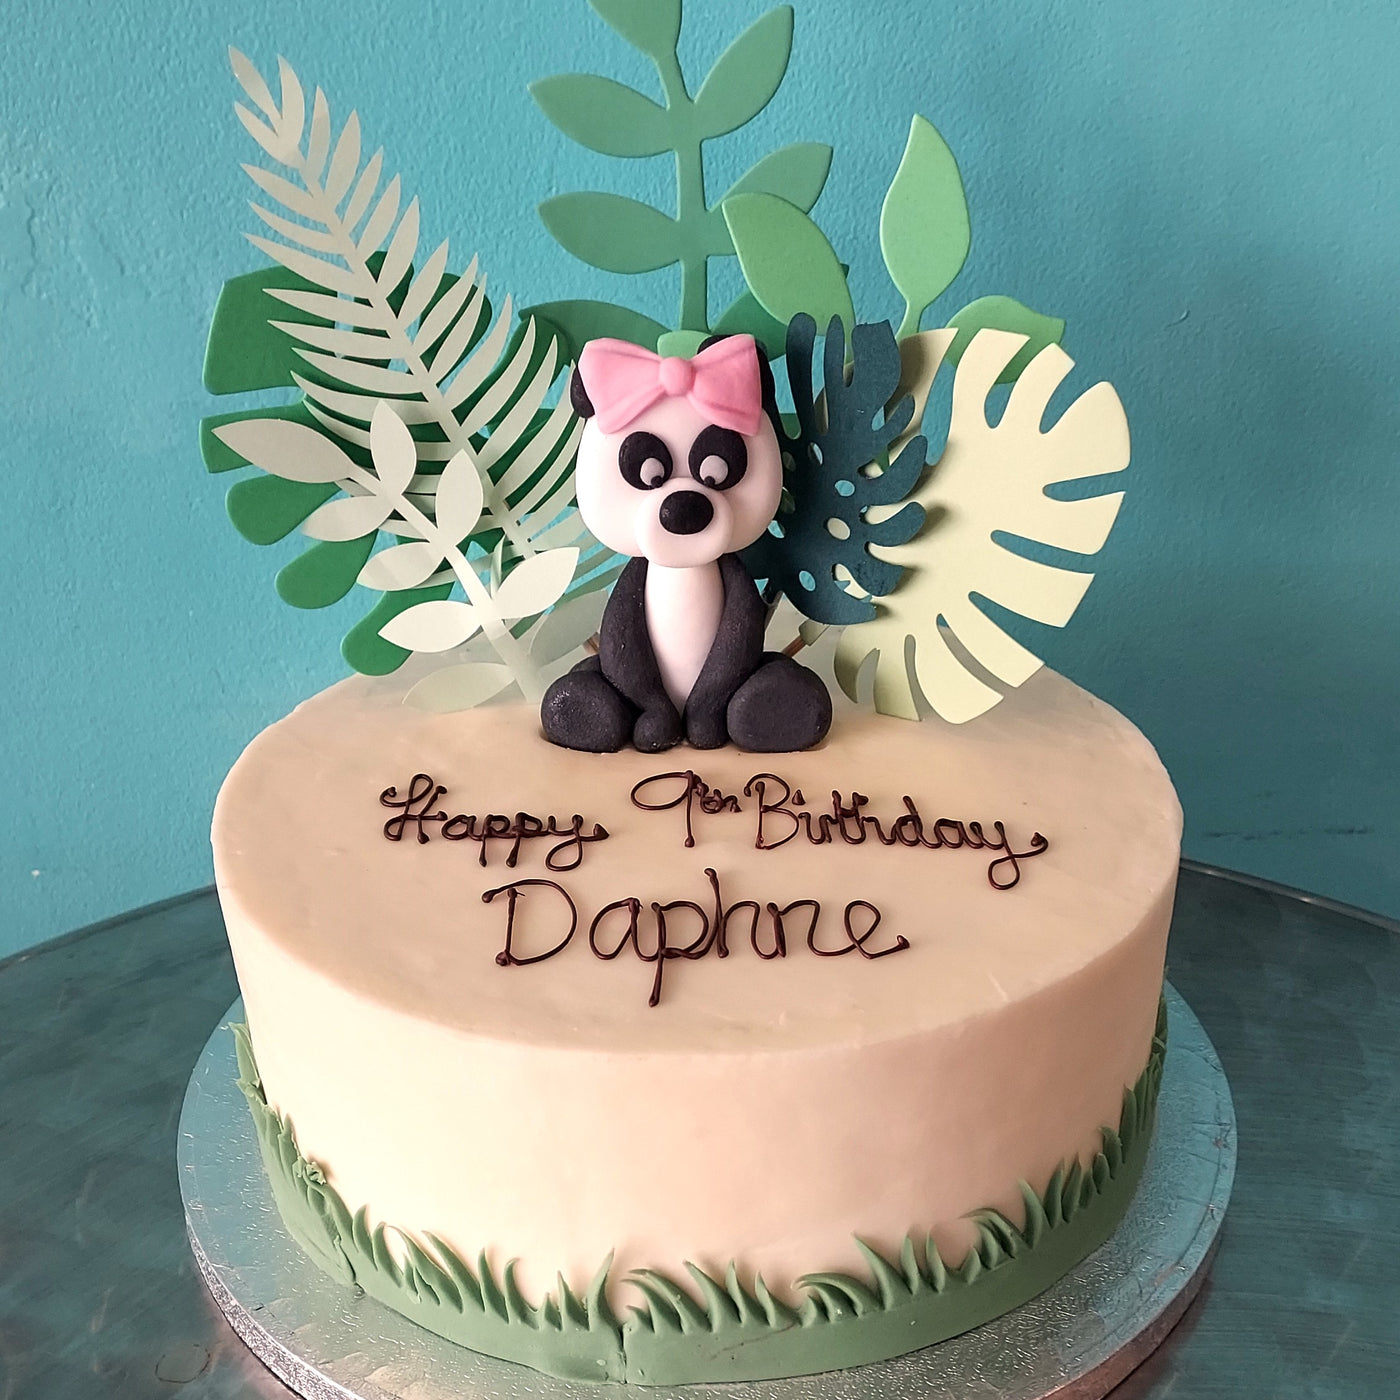 Prima Deli S'pore releasing limited edition panda cake to celebrate Le Le's  1st birthday - Mothership.SG - News from Singapore, Asia and around the  world